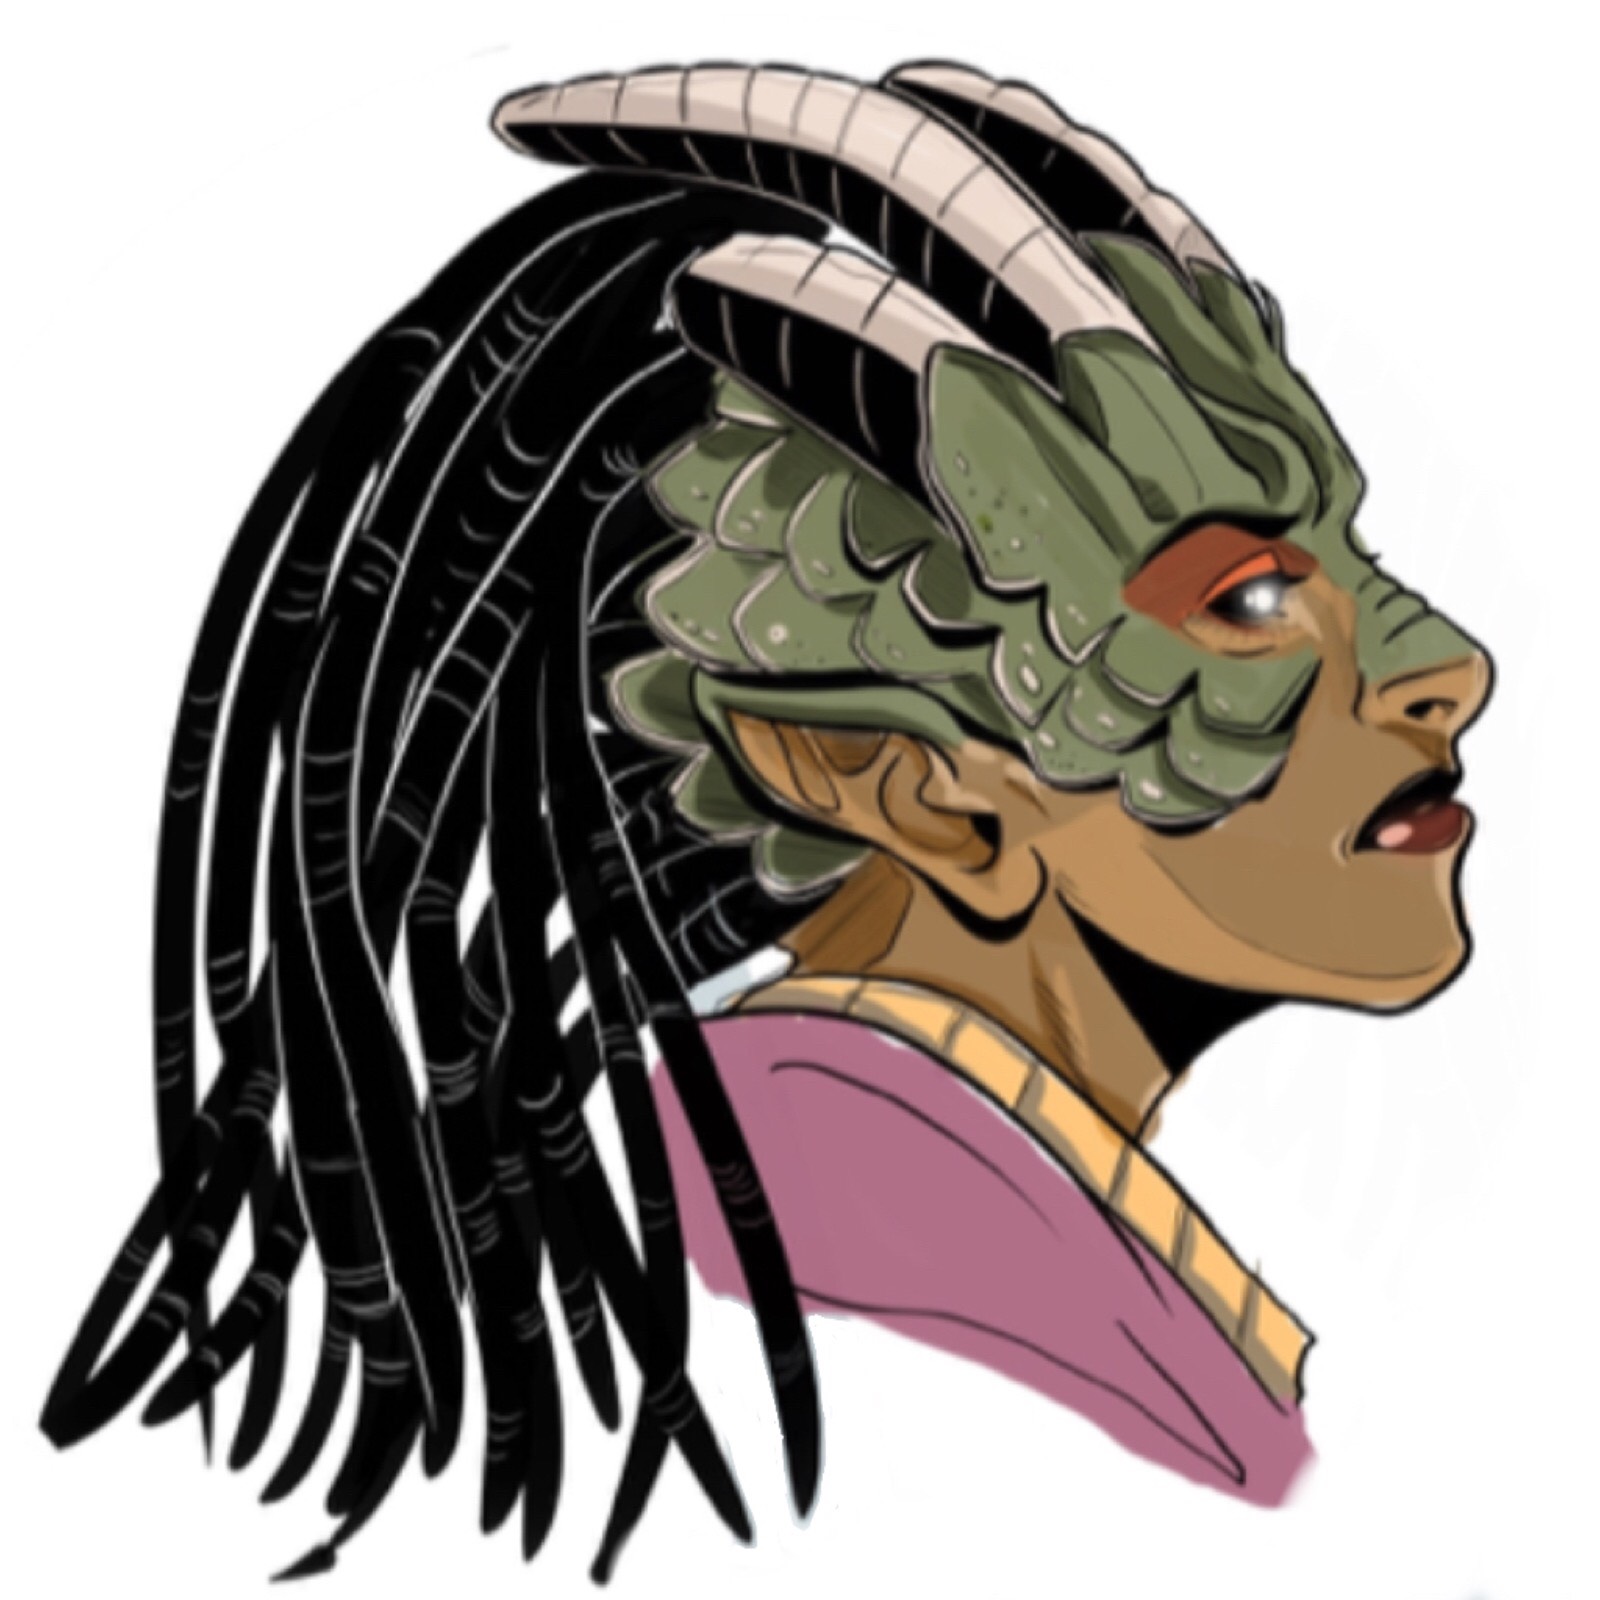 profile image of the kaiju queen